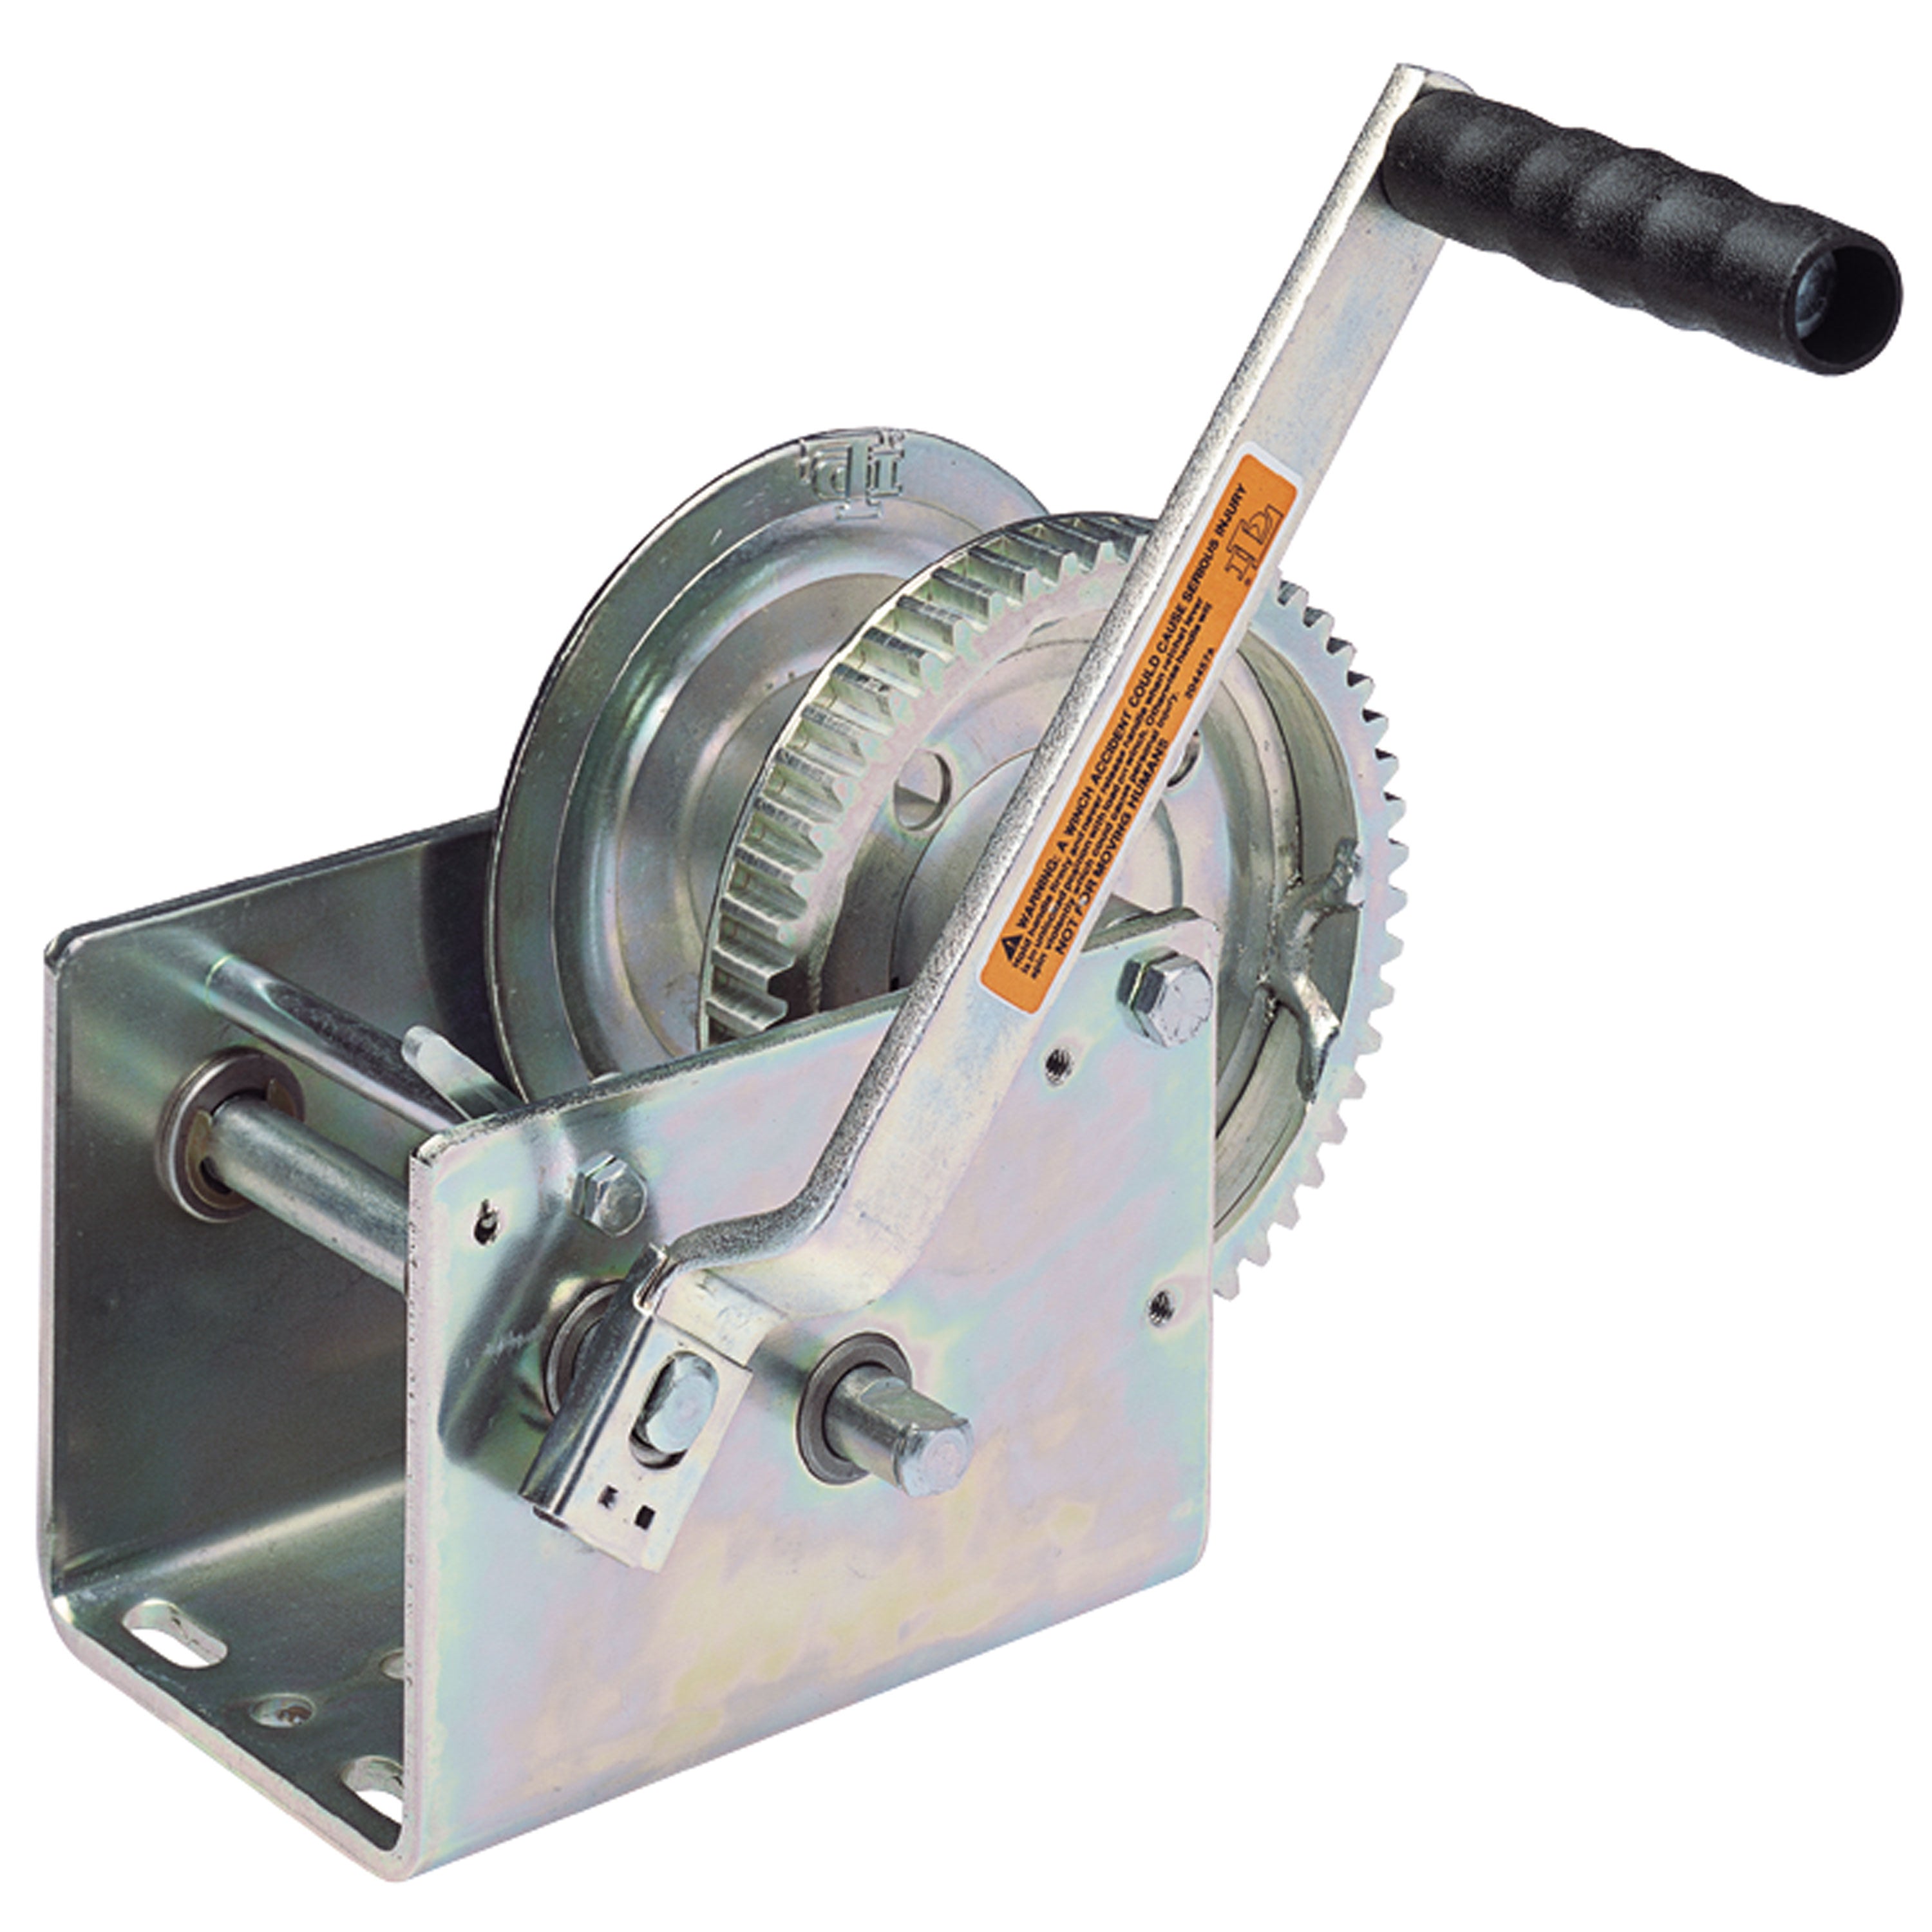 Dutton-Lainson 14825 DL-Series 2-Speed Horizontal Pulling Winch with Ratchet DL2500A - 9.5" Handle, 2500 lb.